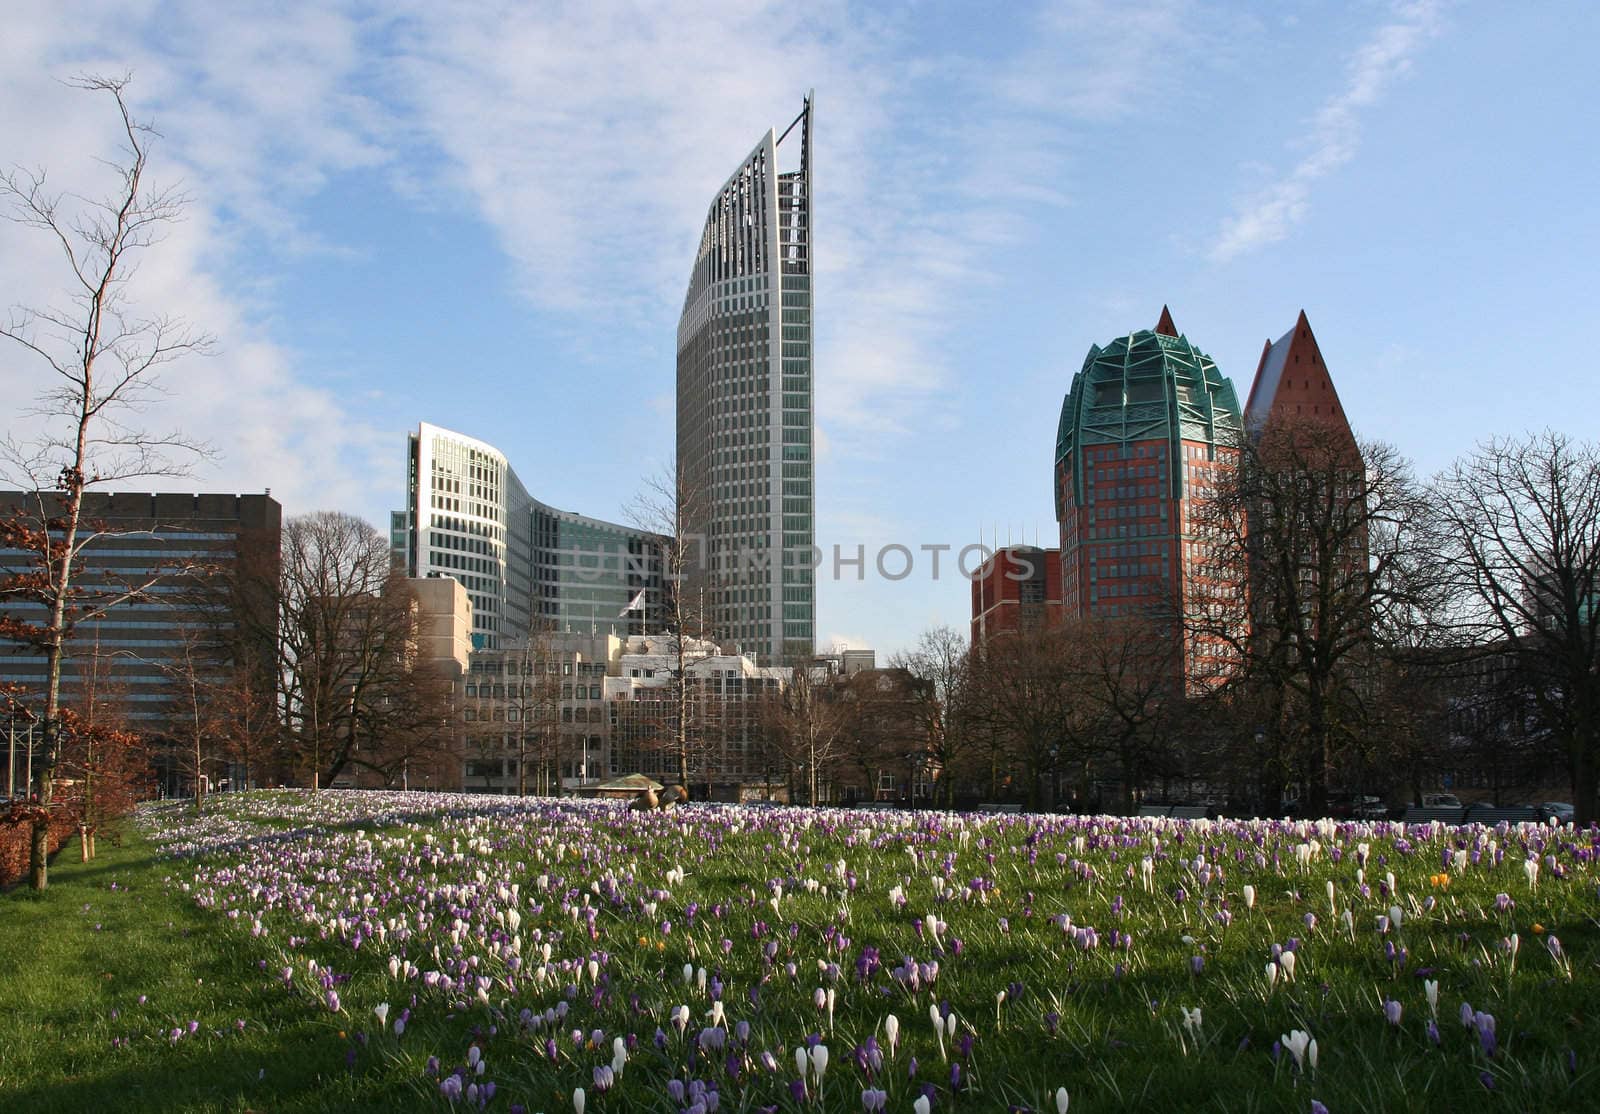 Spring in The Hague by JanKranendonk